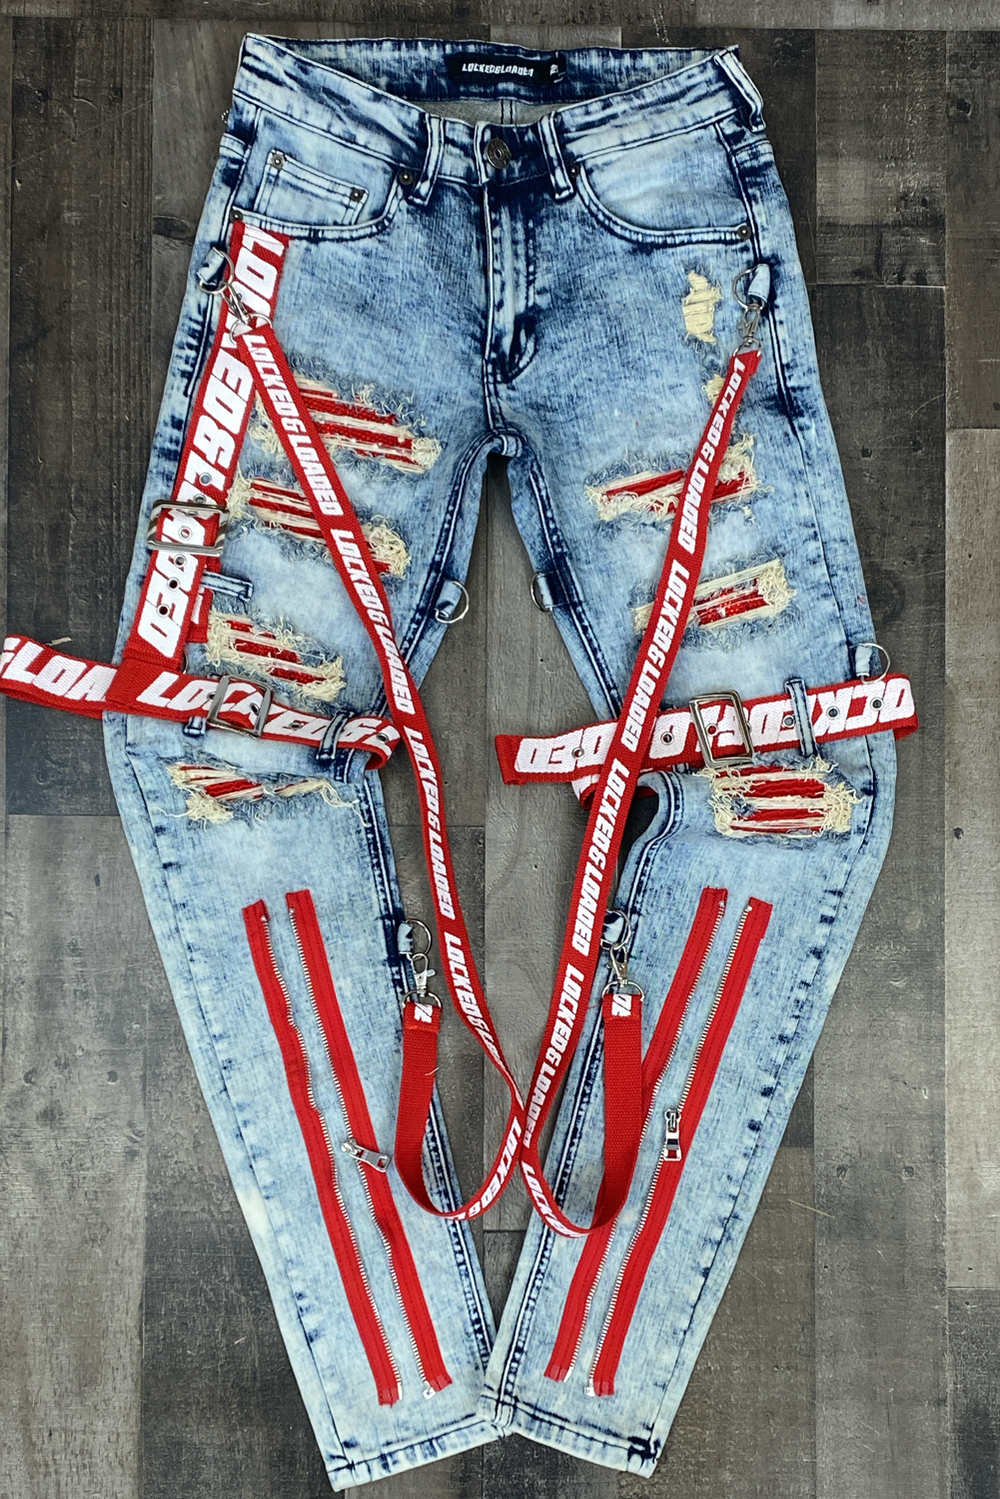 Locked Loaded- locked & loaded strapped studded jeans (light blue/red)